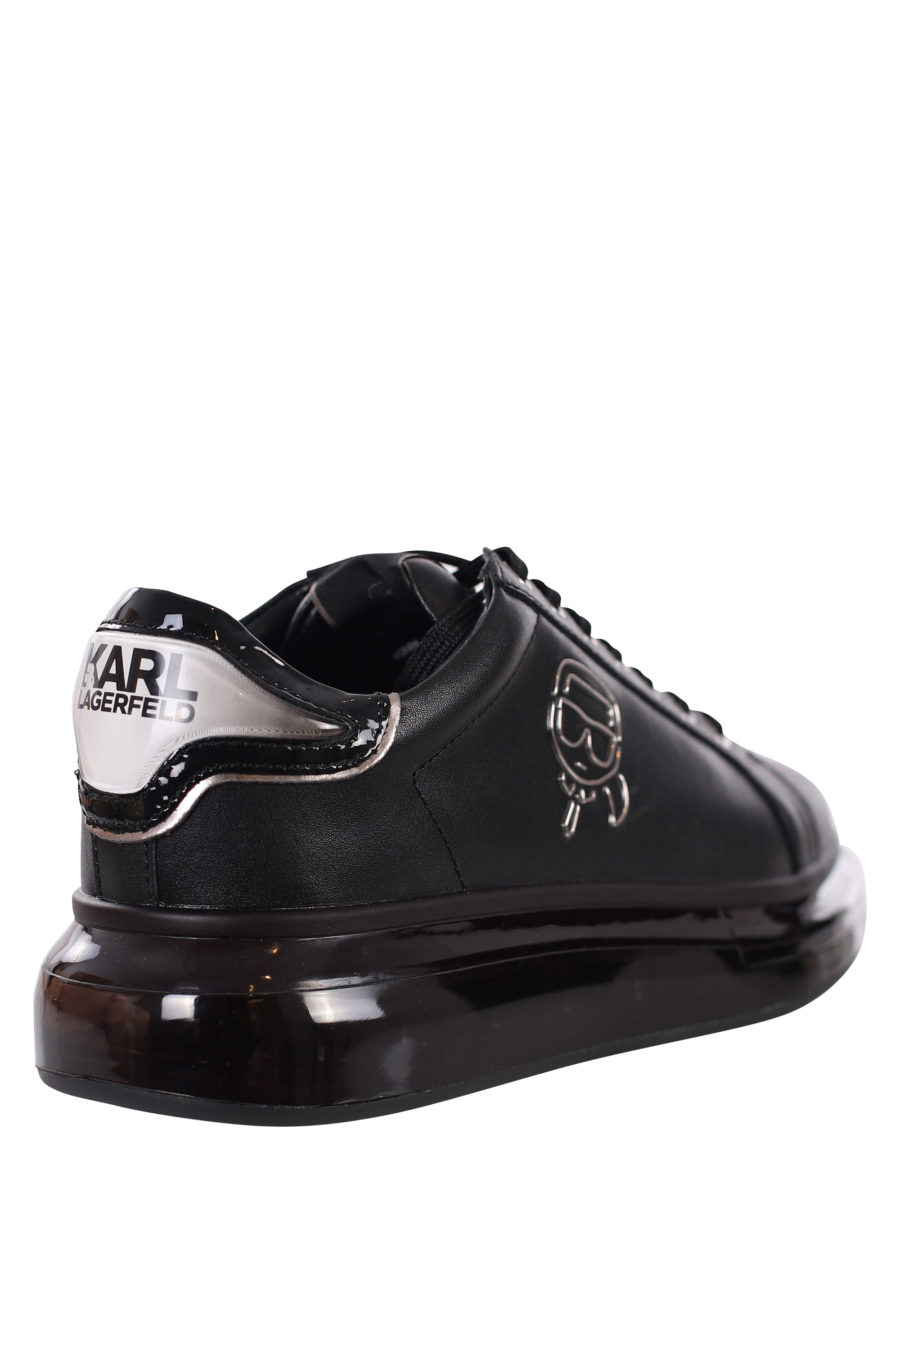 Black trainers with black silhouette logo and black sole - IMG 0415